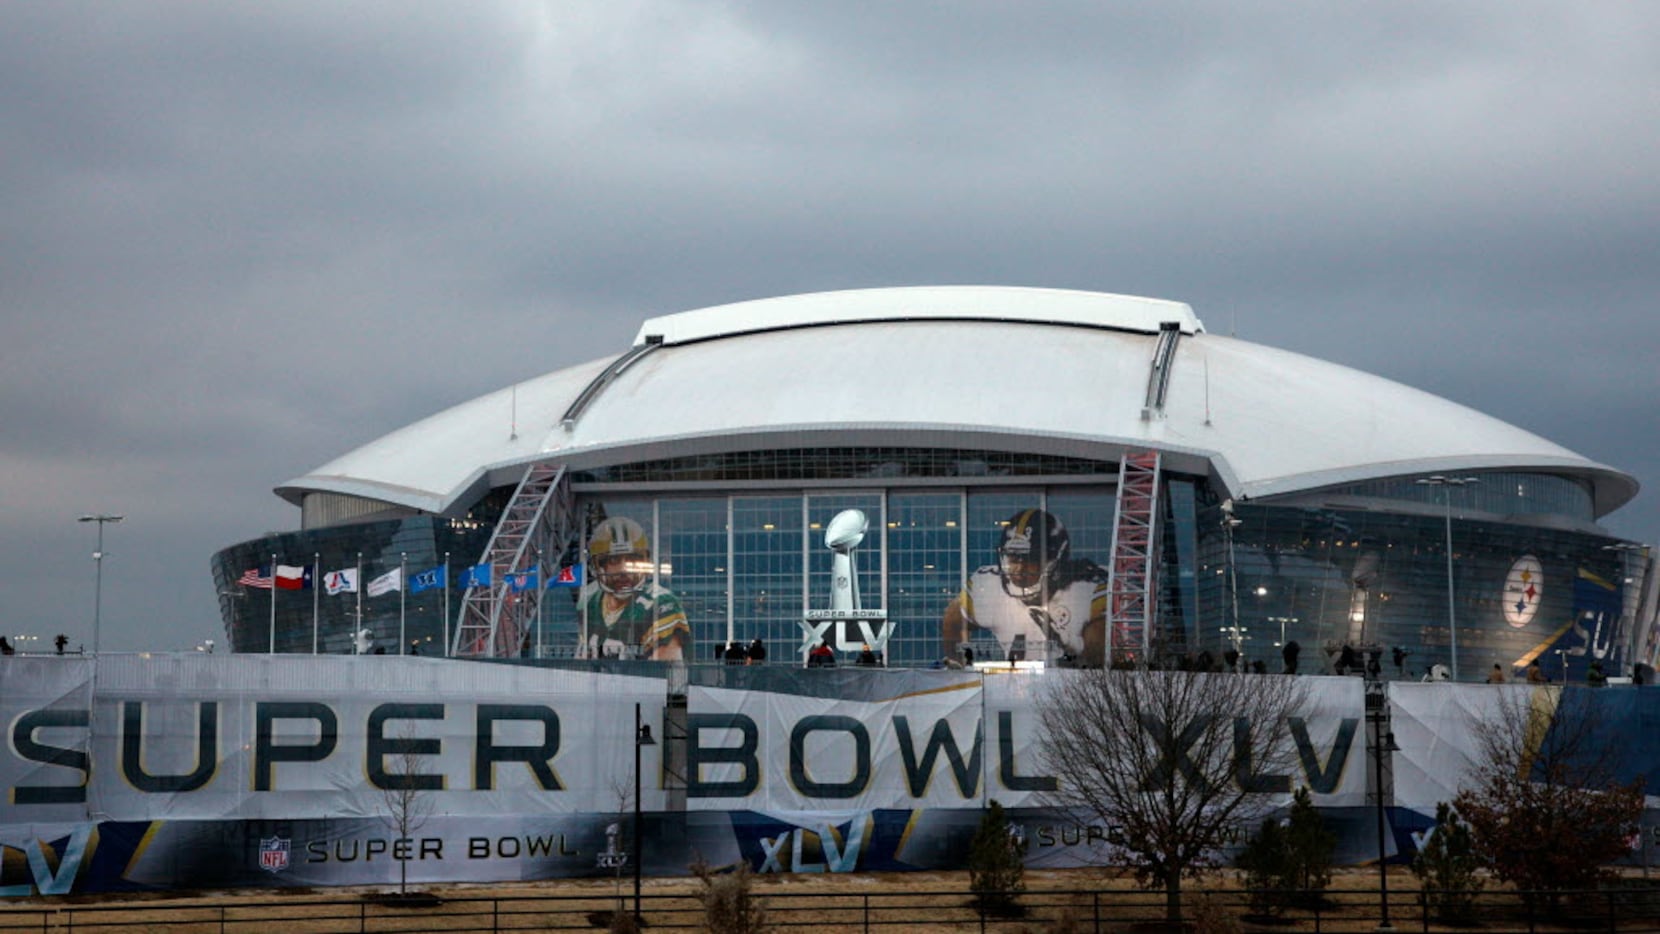 what city is the super bowl in 2022